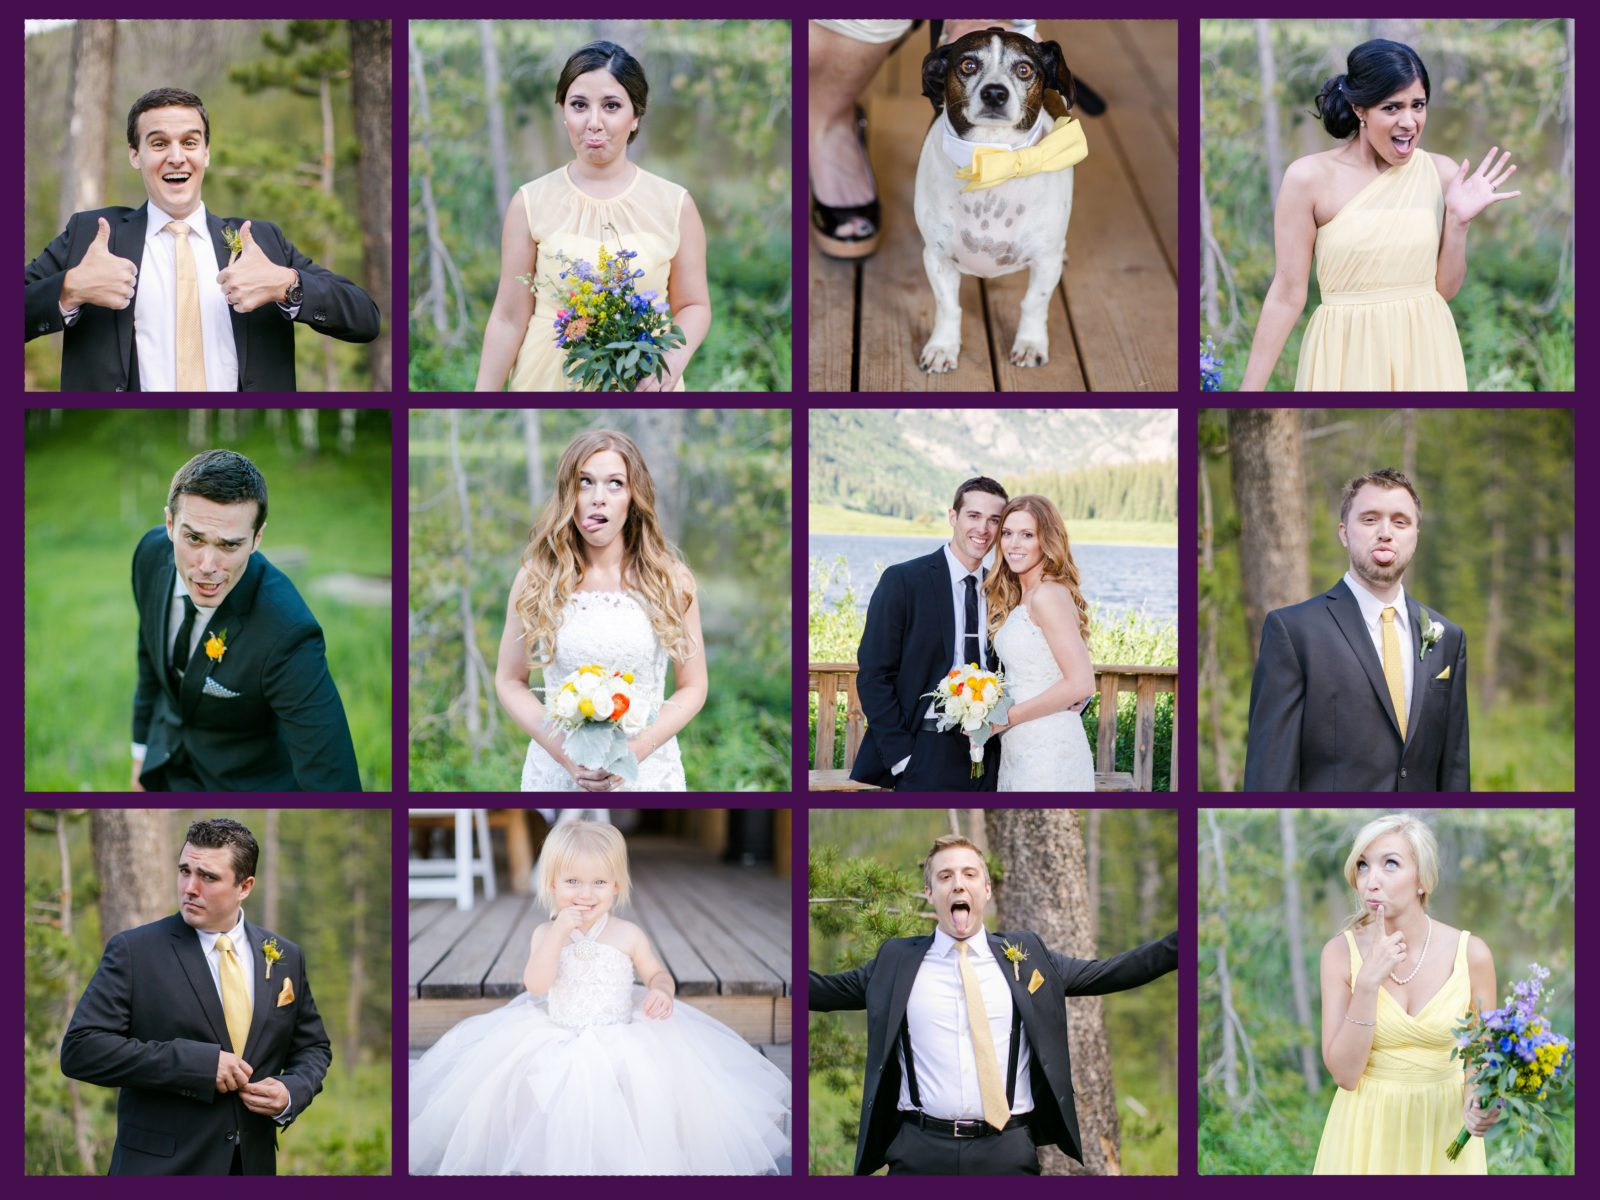 brady bunch squares of bridal party